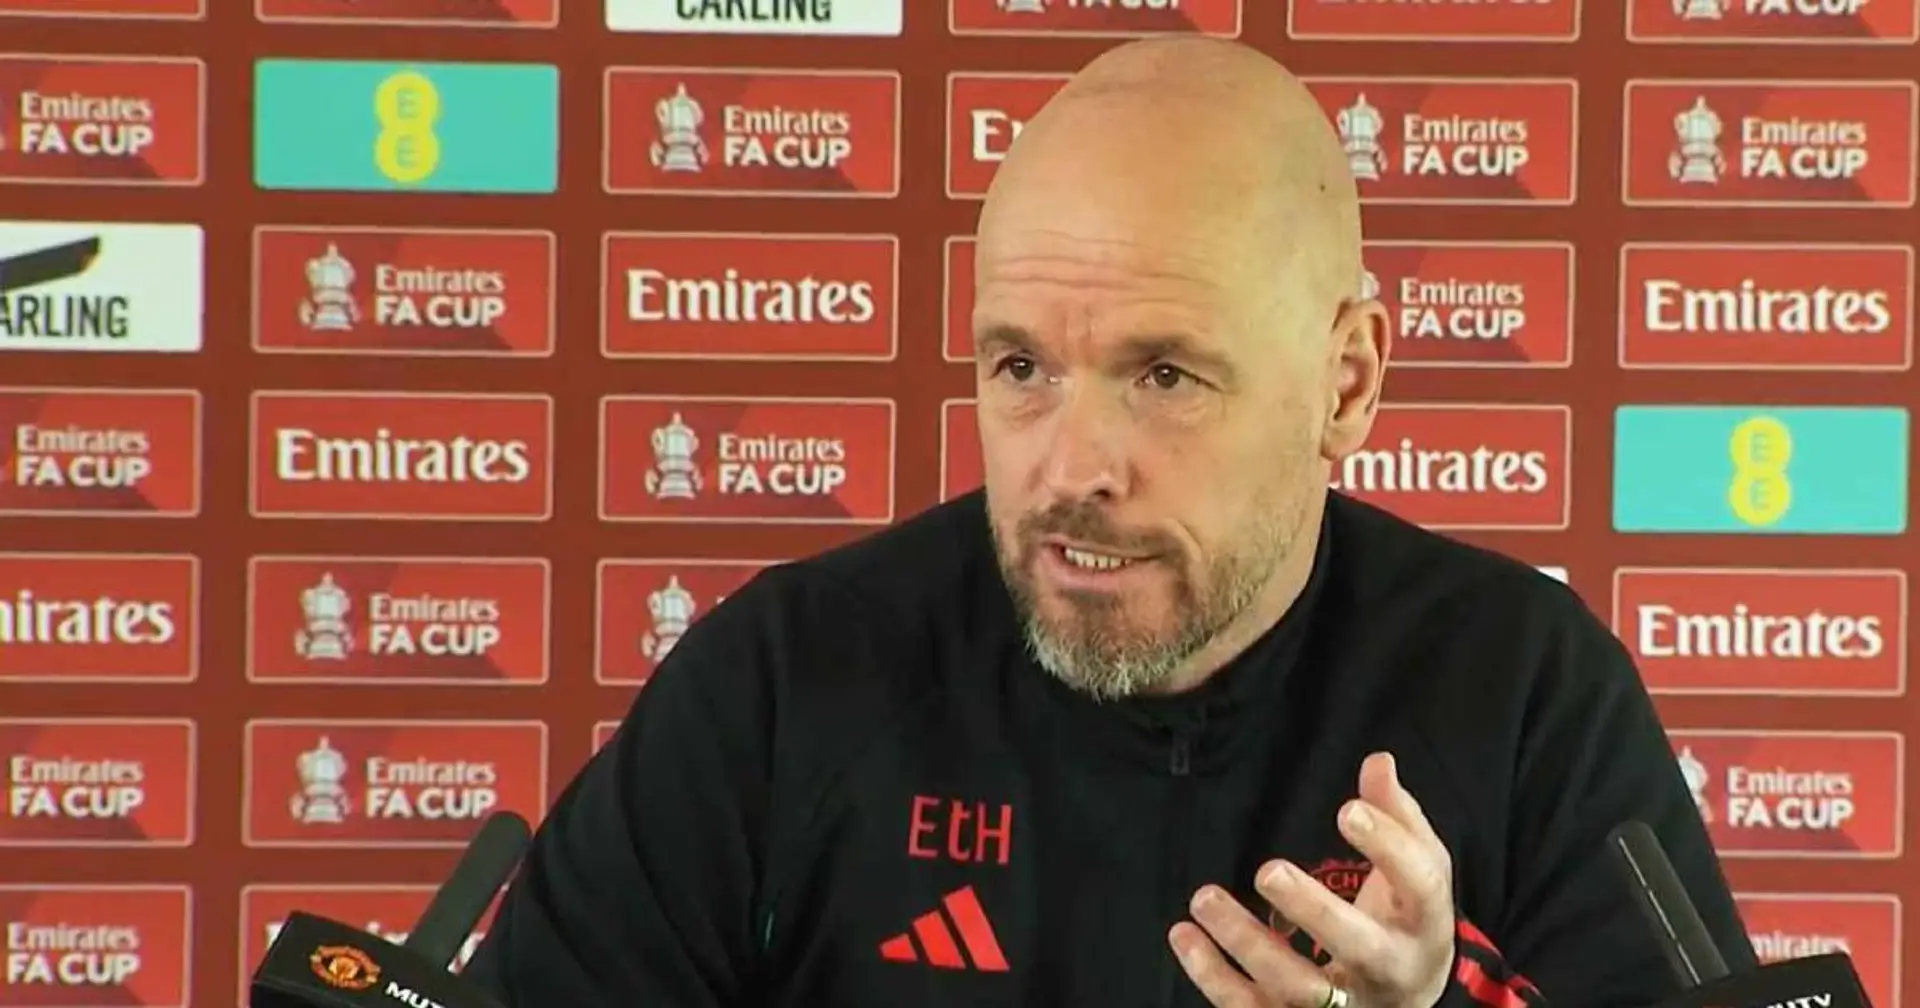 'I can’t be bothered': Ten Hag issues defiant message to critics ahead of FA Cup semi-final